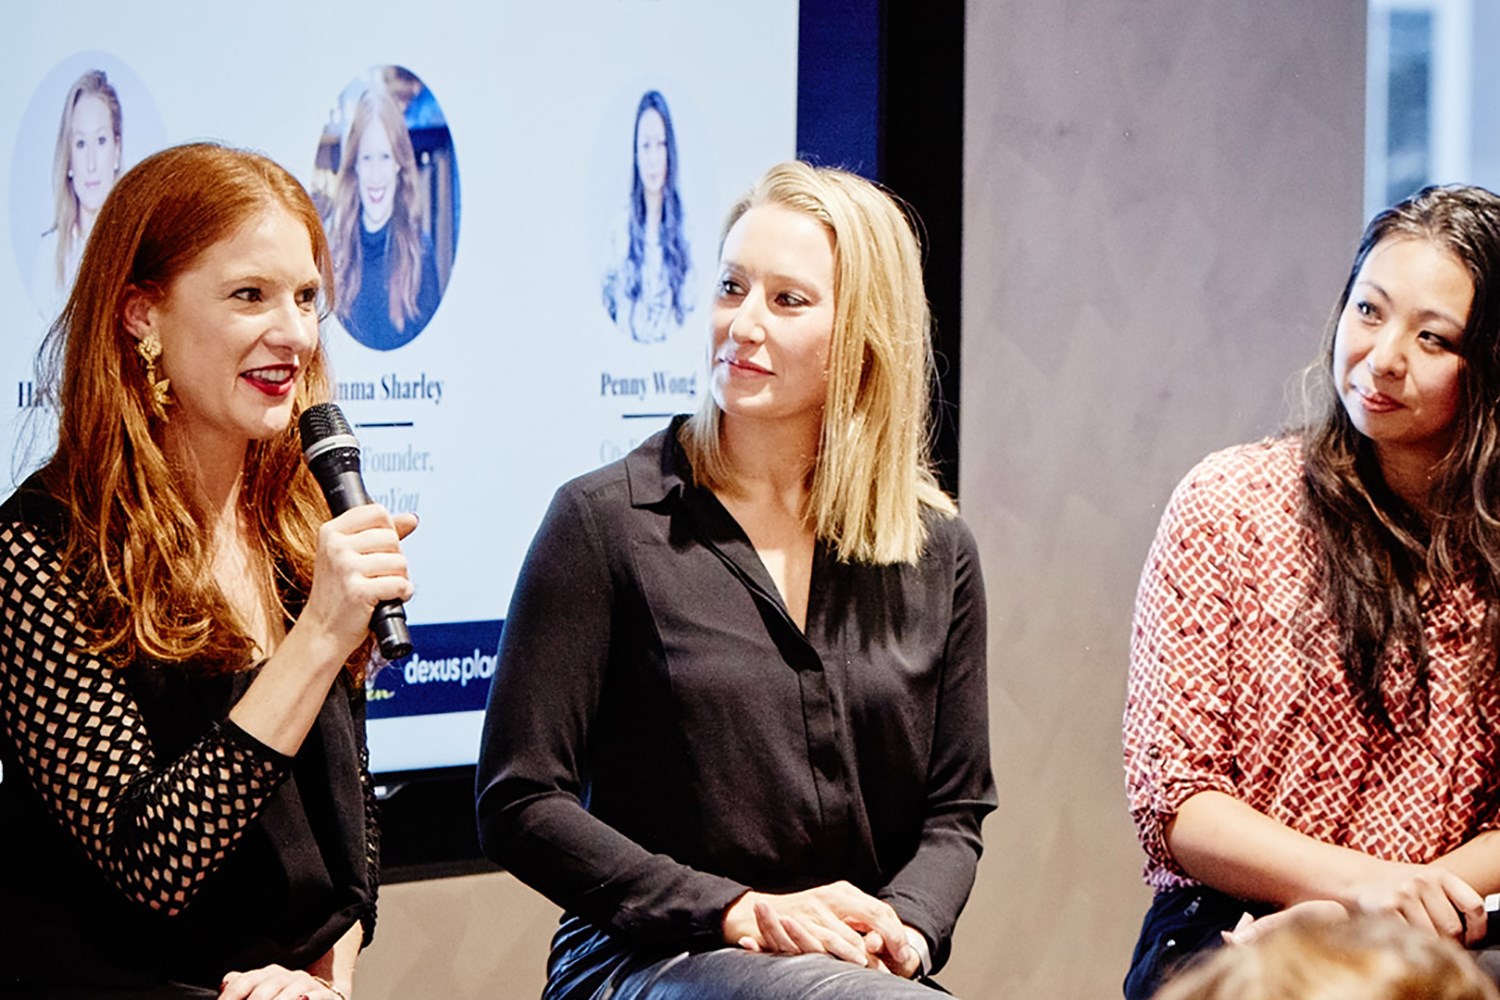 ower Women in Tech panel – Emma Sharley, Co-Founder/CMO, Shop You; Hayley Warren, Founder/CEO, Halo Medical Devices; Penny Wong, Co-Founder, Radmis.